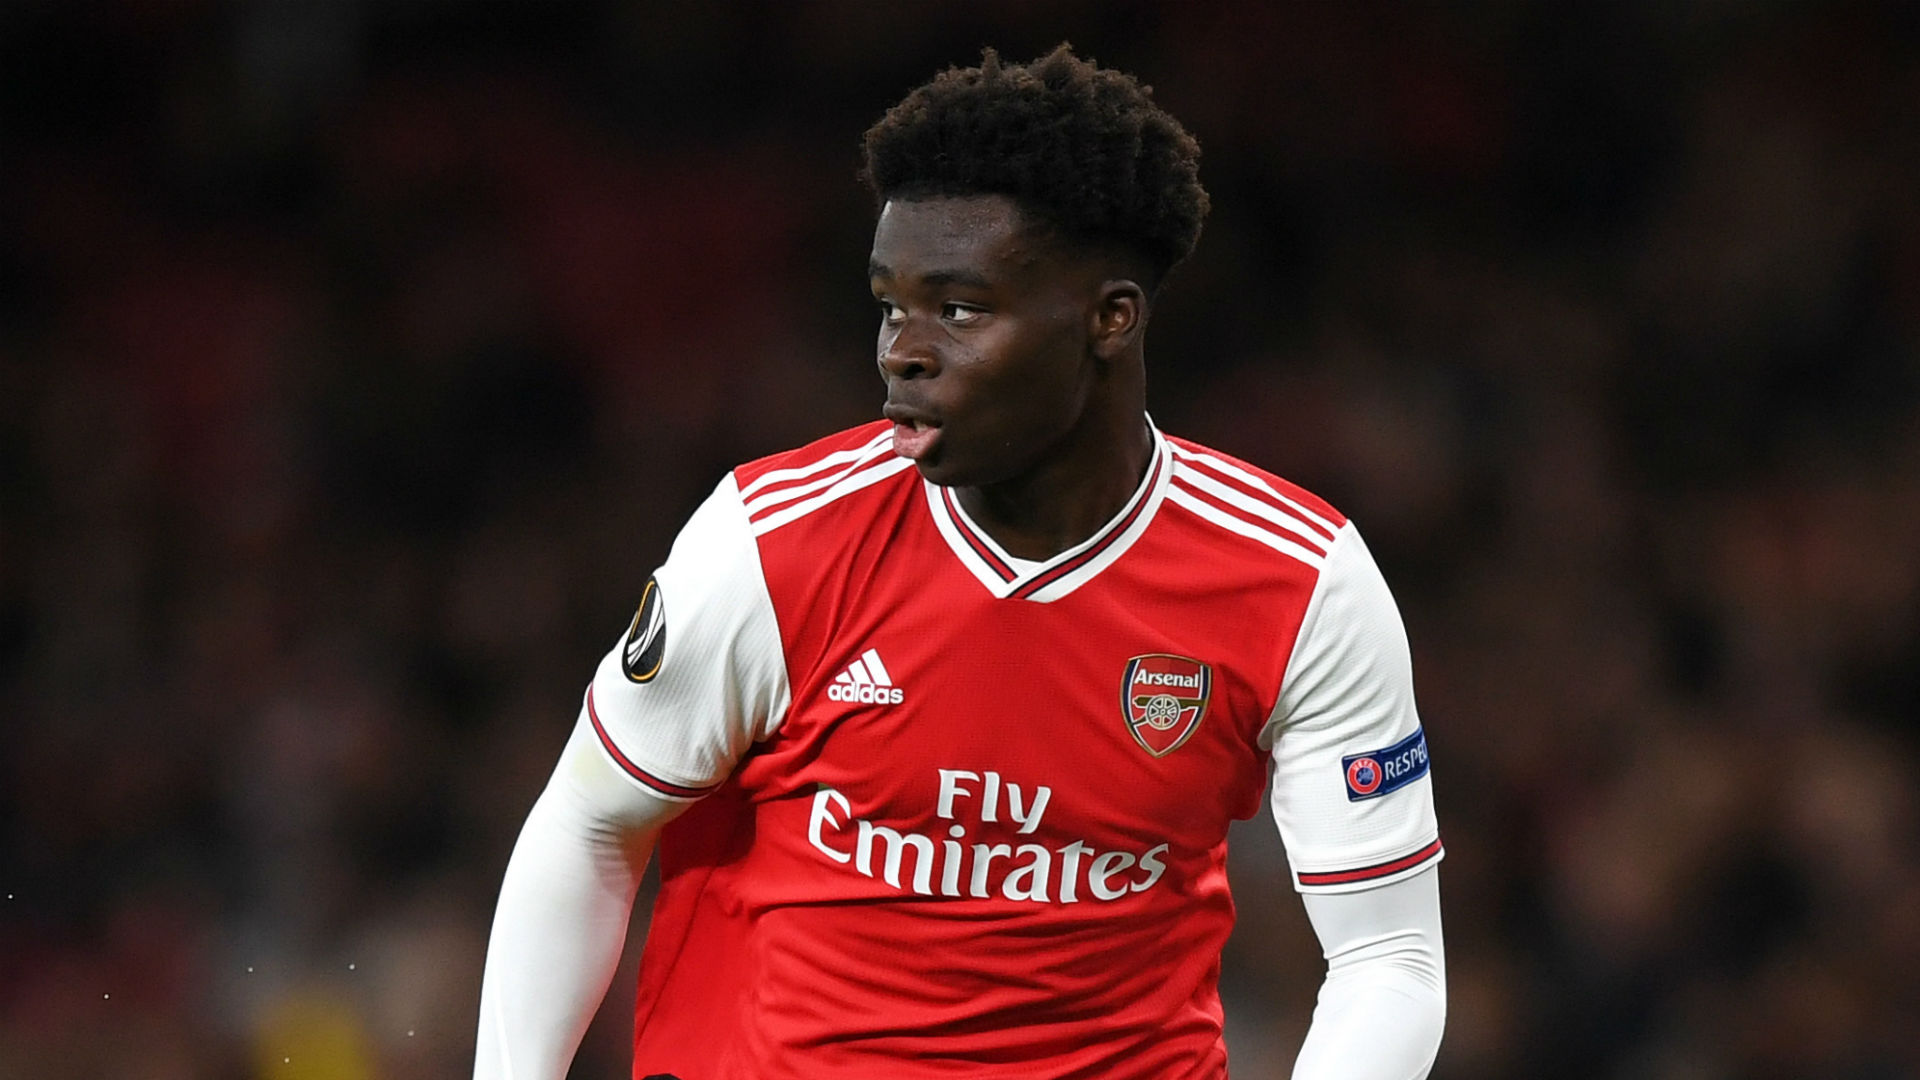  Bukayo Saka is playing soccer for Arsenal, wearing a red jersey with white sleeves and white shorts.